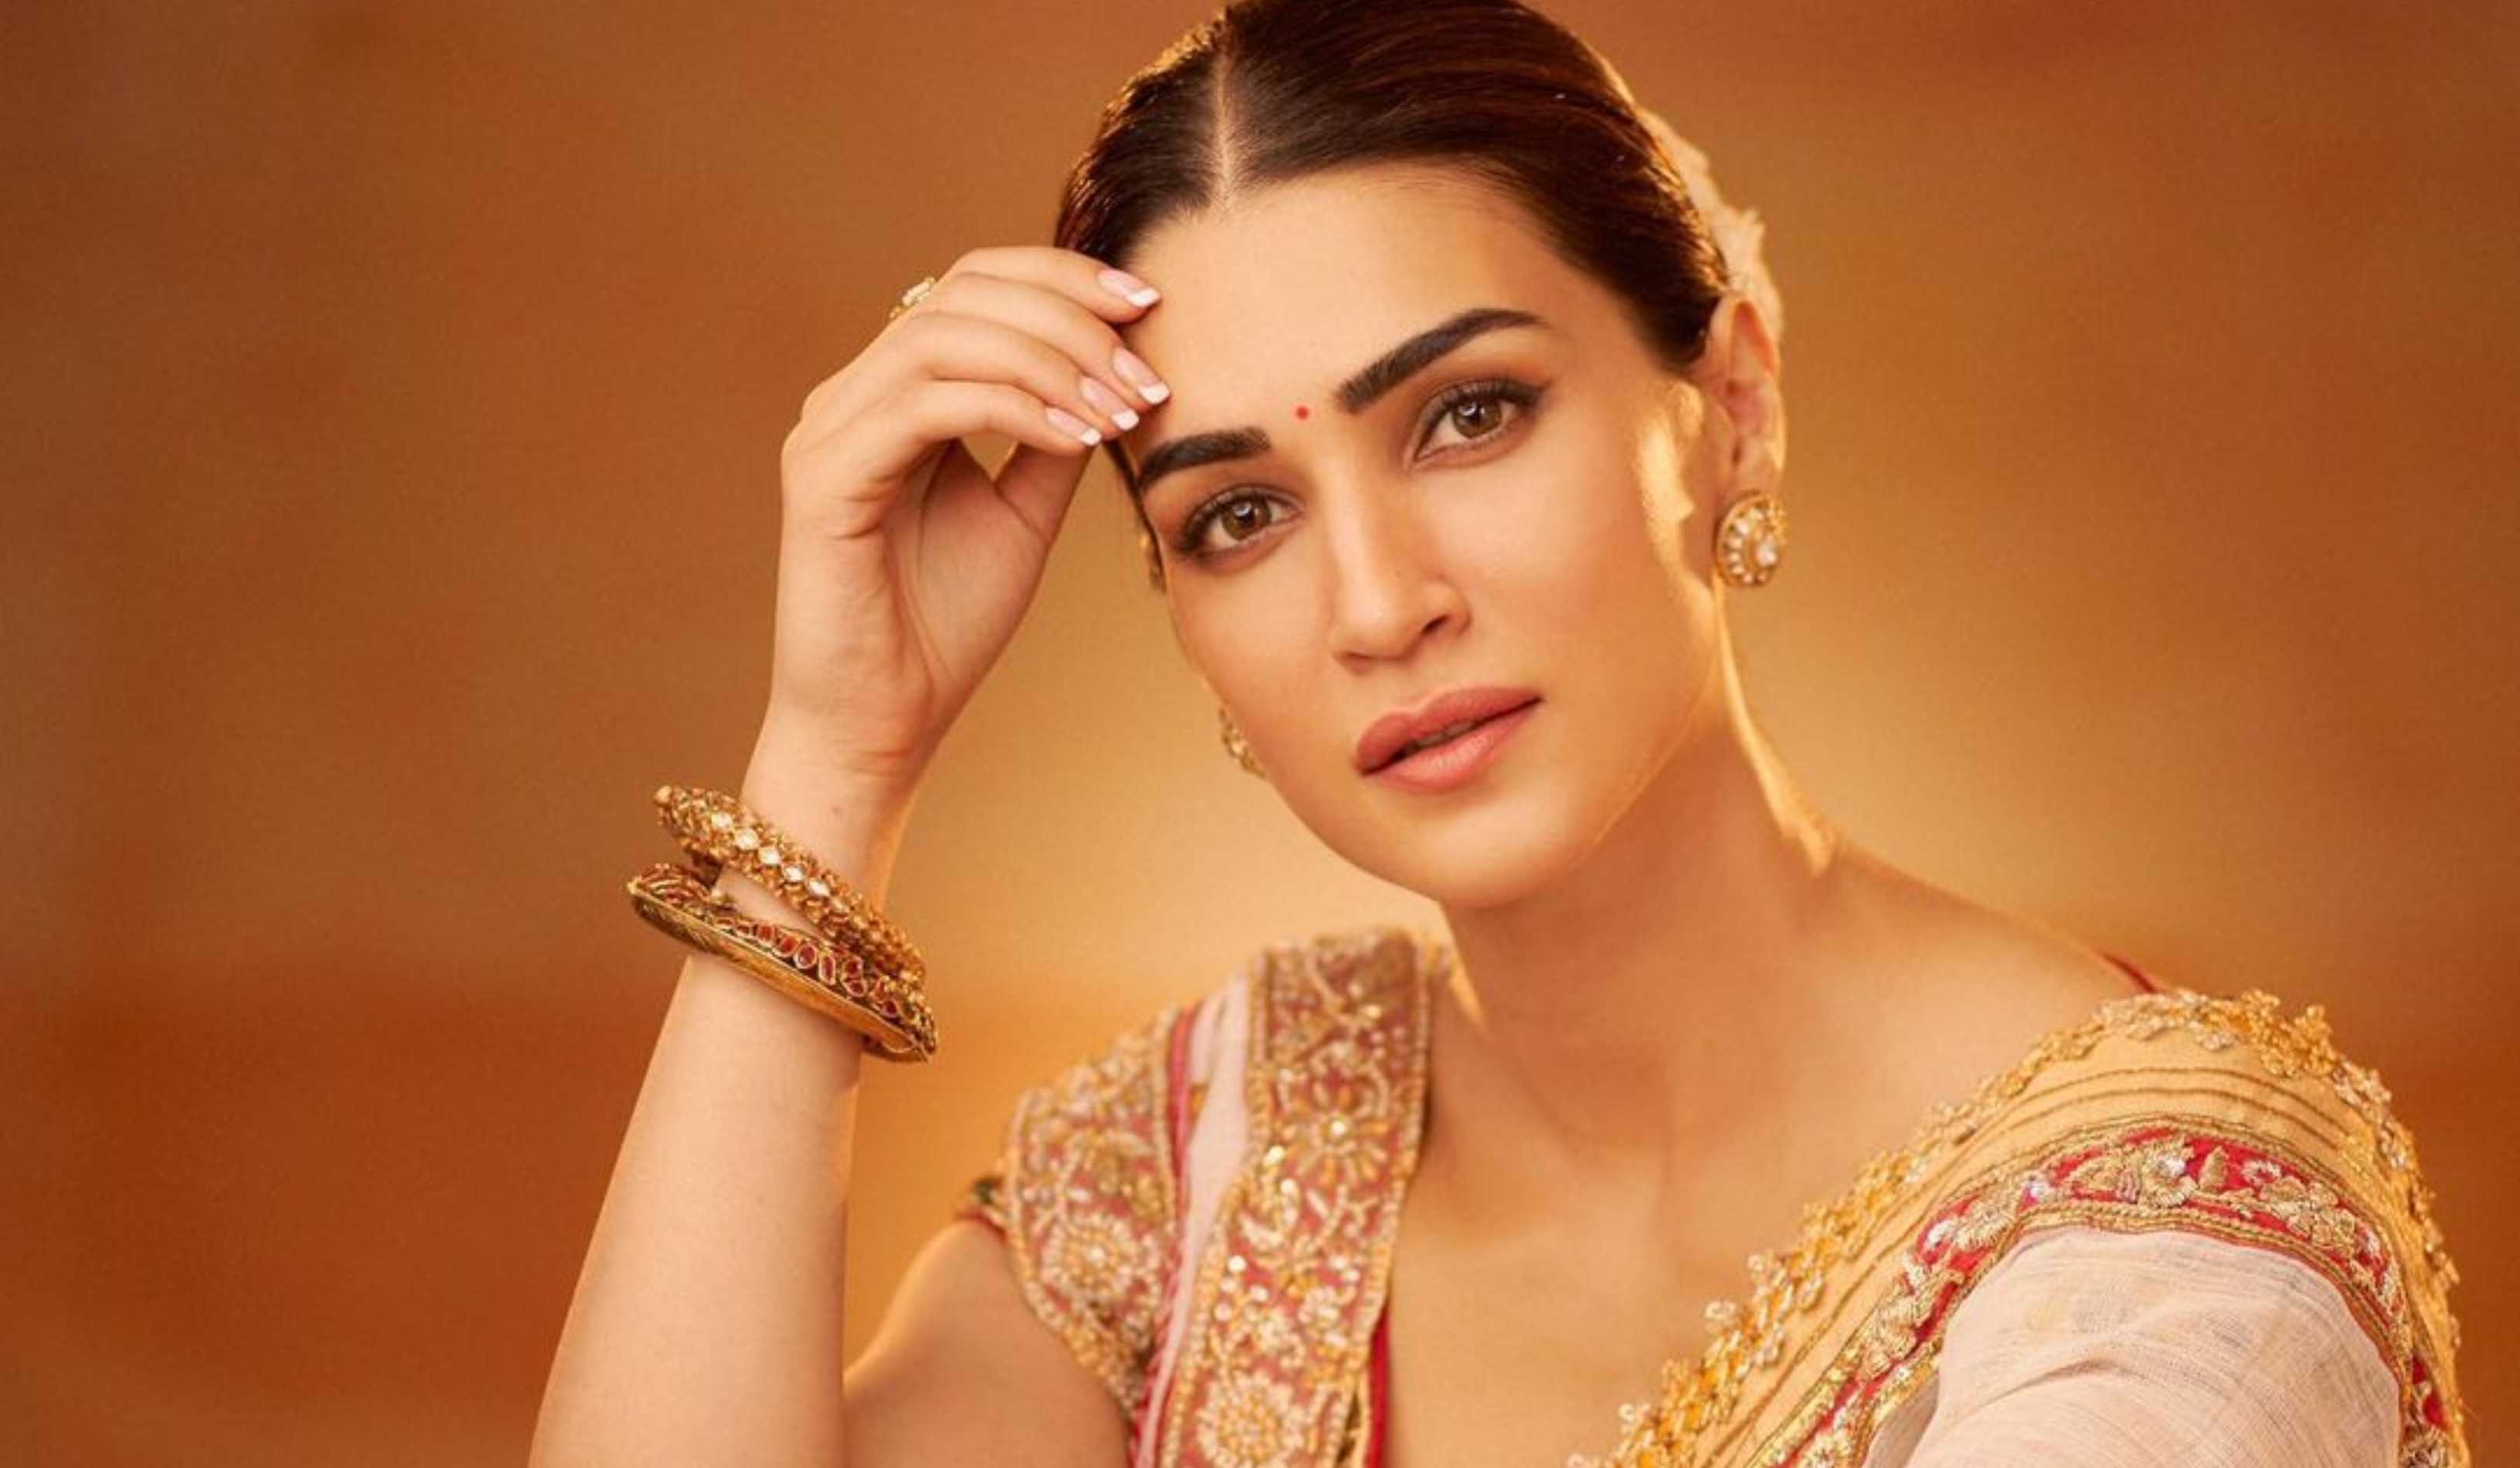 Kriti Sanon opens up about her struggles as she clocks 9 years in Bollywood: ‘When you come from the outside..’